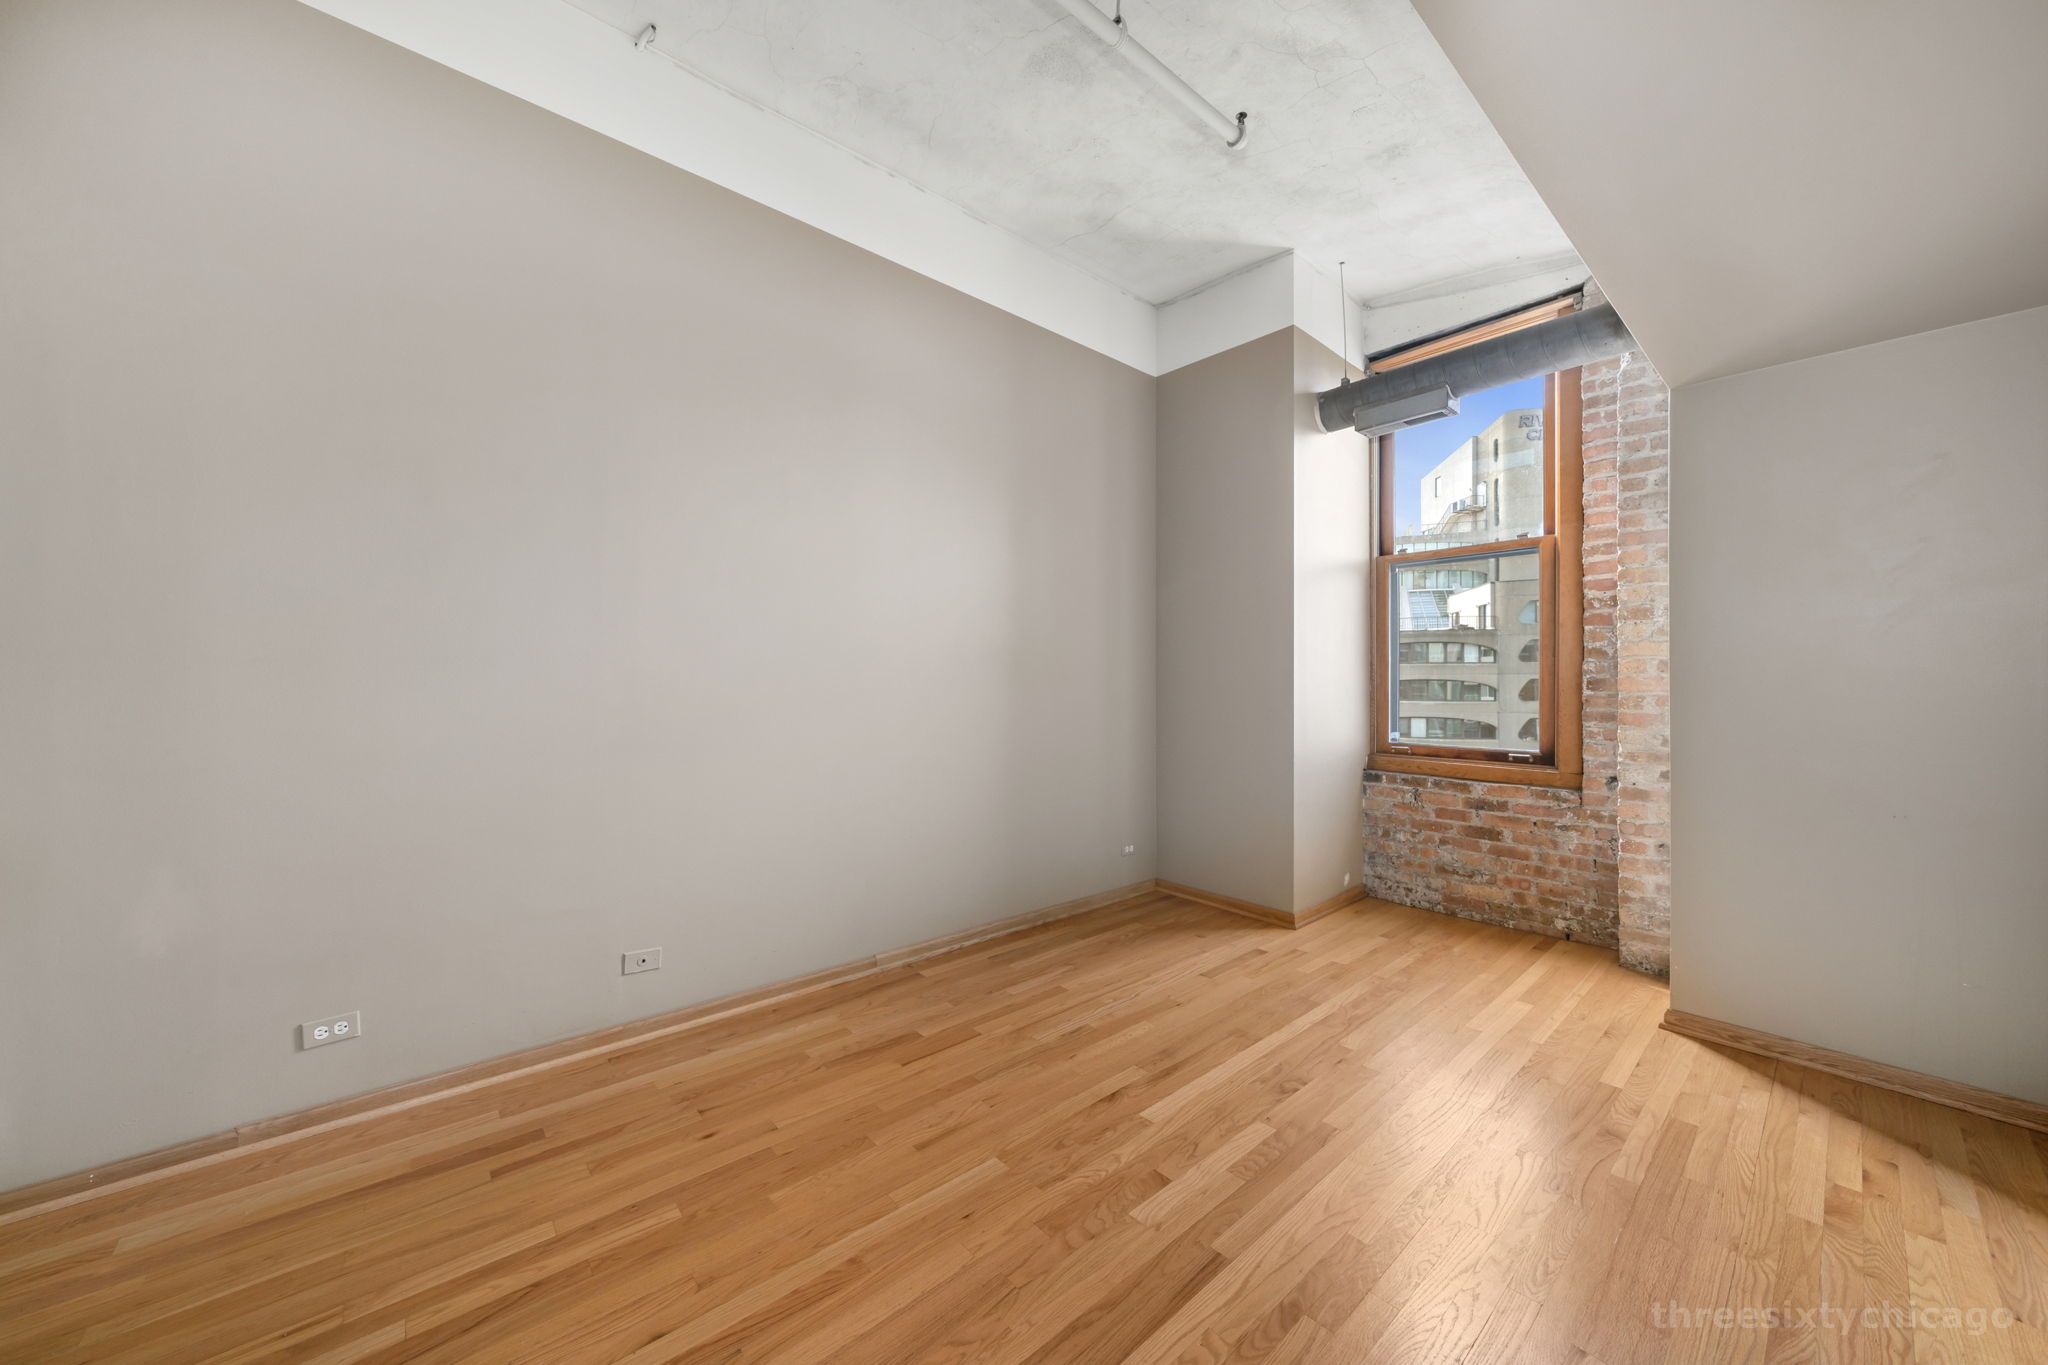  801 S Wells St 807, Chicago, IL 60607, US Photo 19